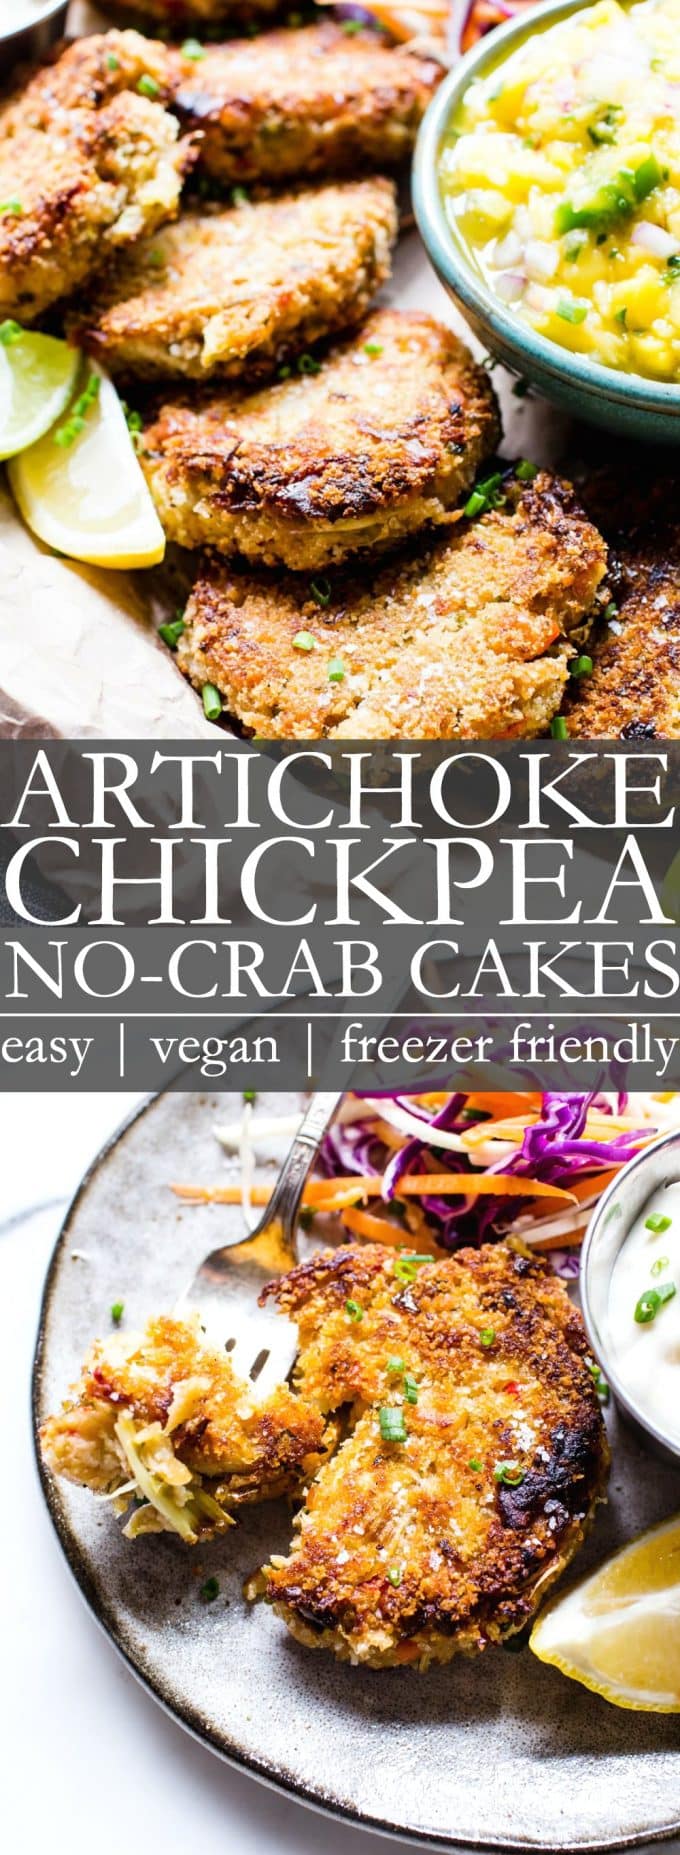 Pinterest pin for artichoke chickpea vegan crab cakes with two images: 1. crabless cakes on a platter. 2. vegan crab cakes on a plate. 